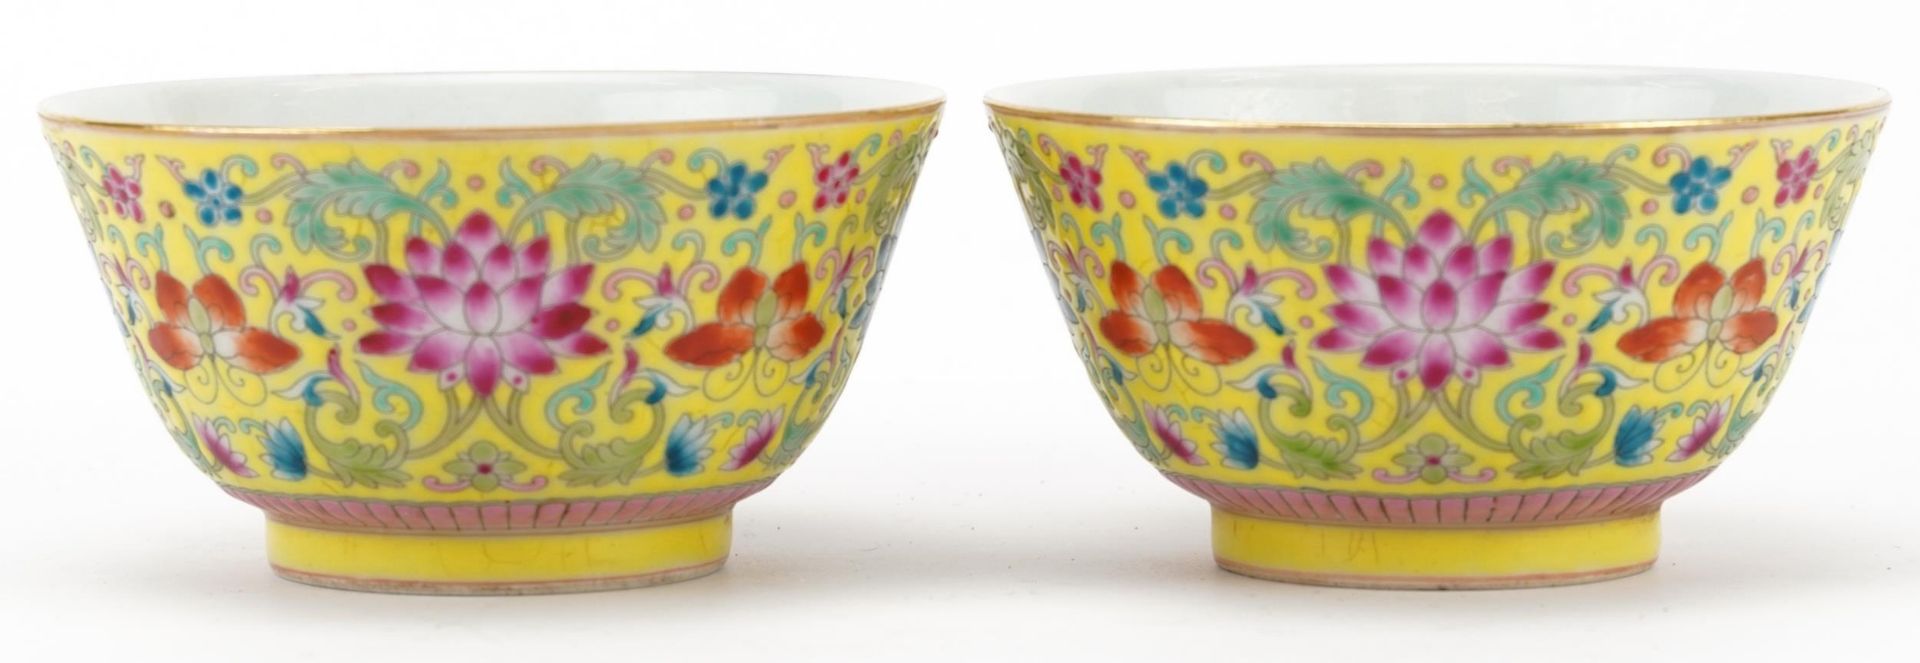 Pair of Chinese porcelain yellow ground bowls hand painted with flowers, four figure character marks